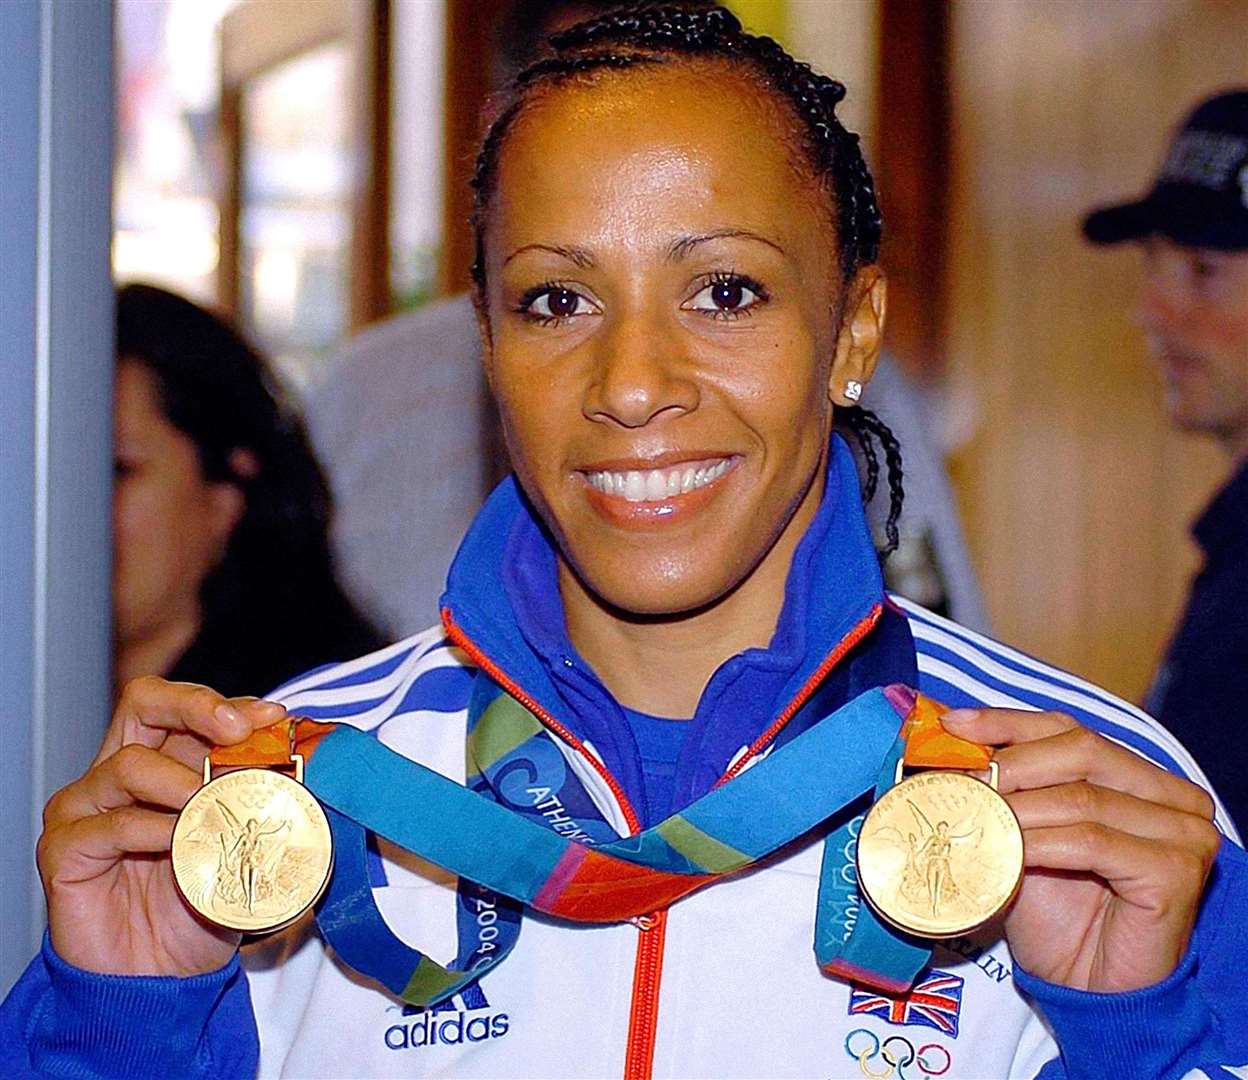 Dame Kelly with her two Olympic Gold Medals for 800m and 1500m events at the 2004 Olympics in Athens. Picture: Rebecca Naden/PA